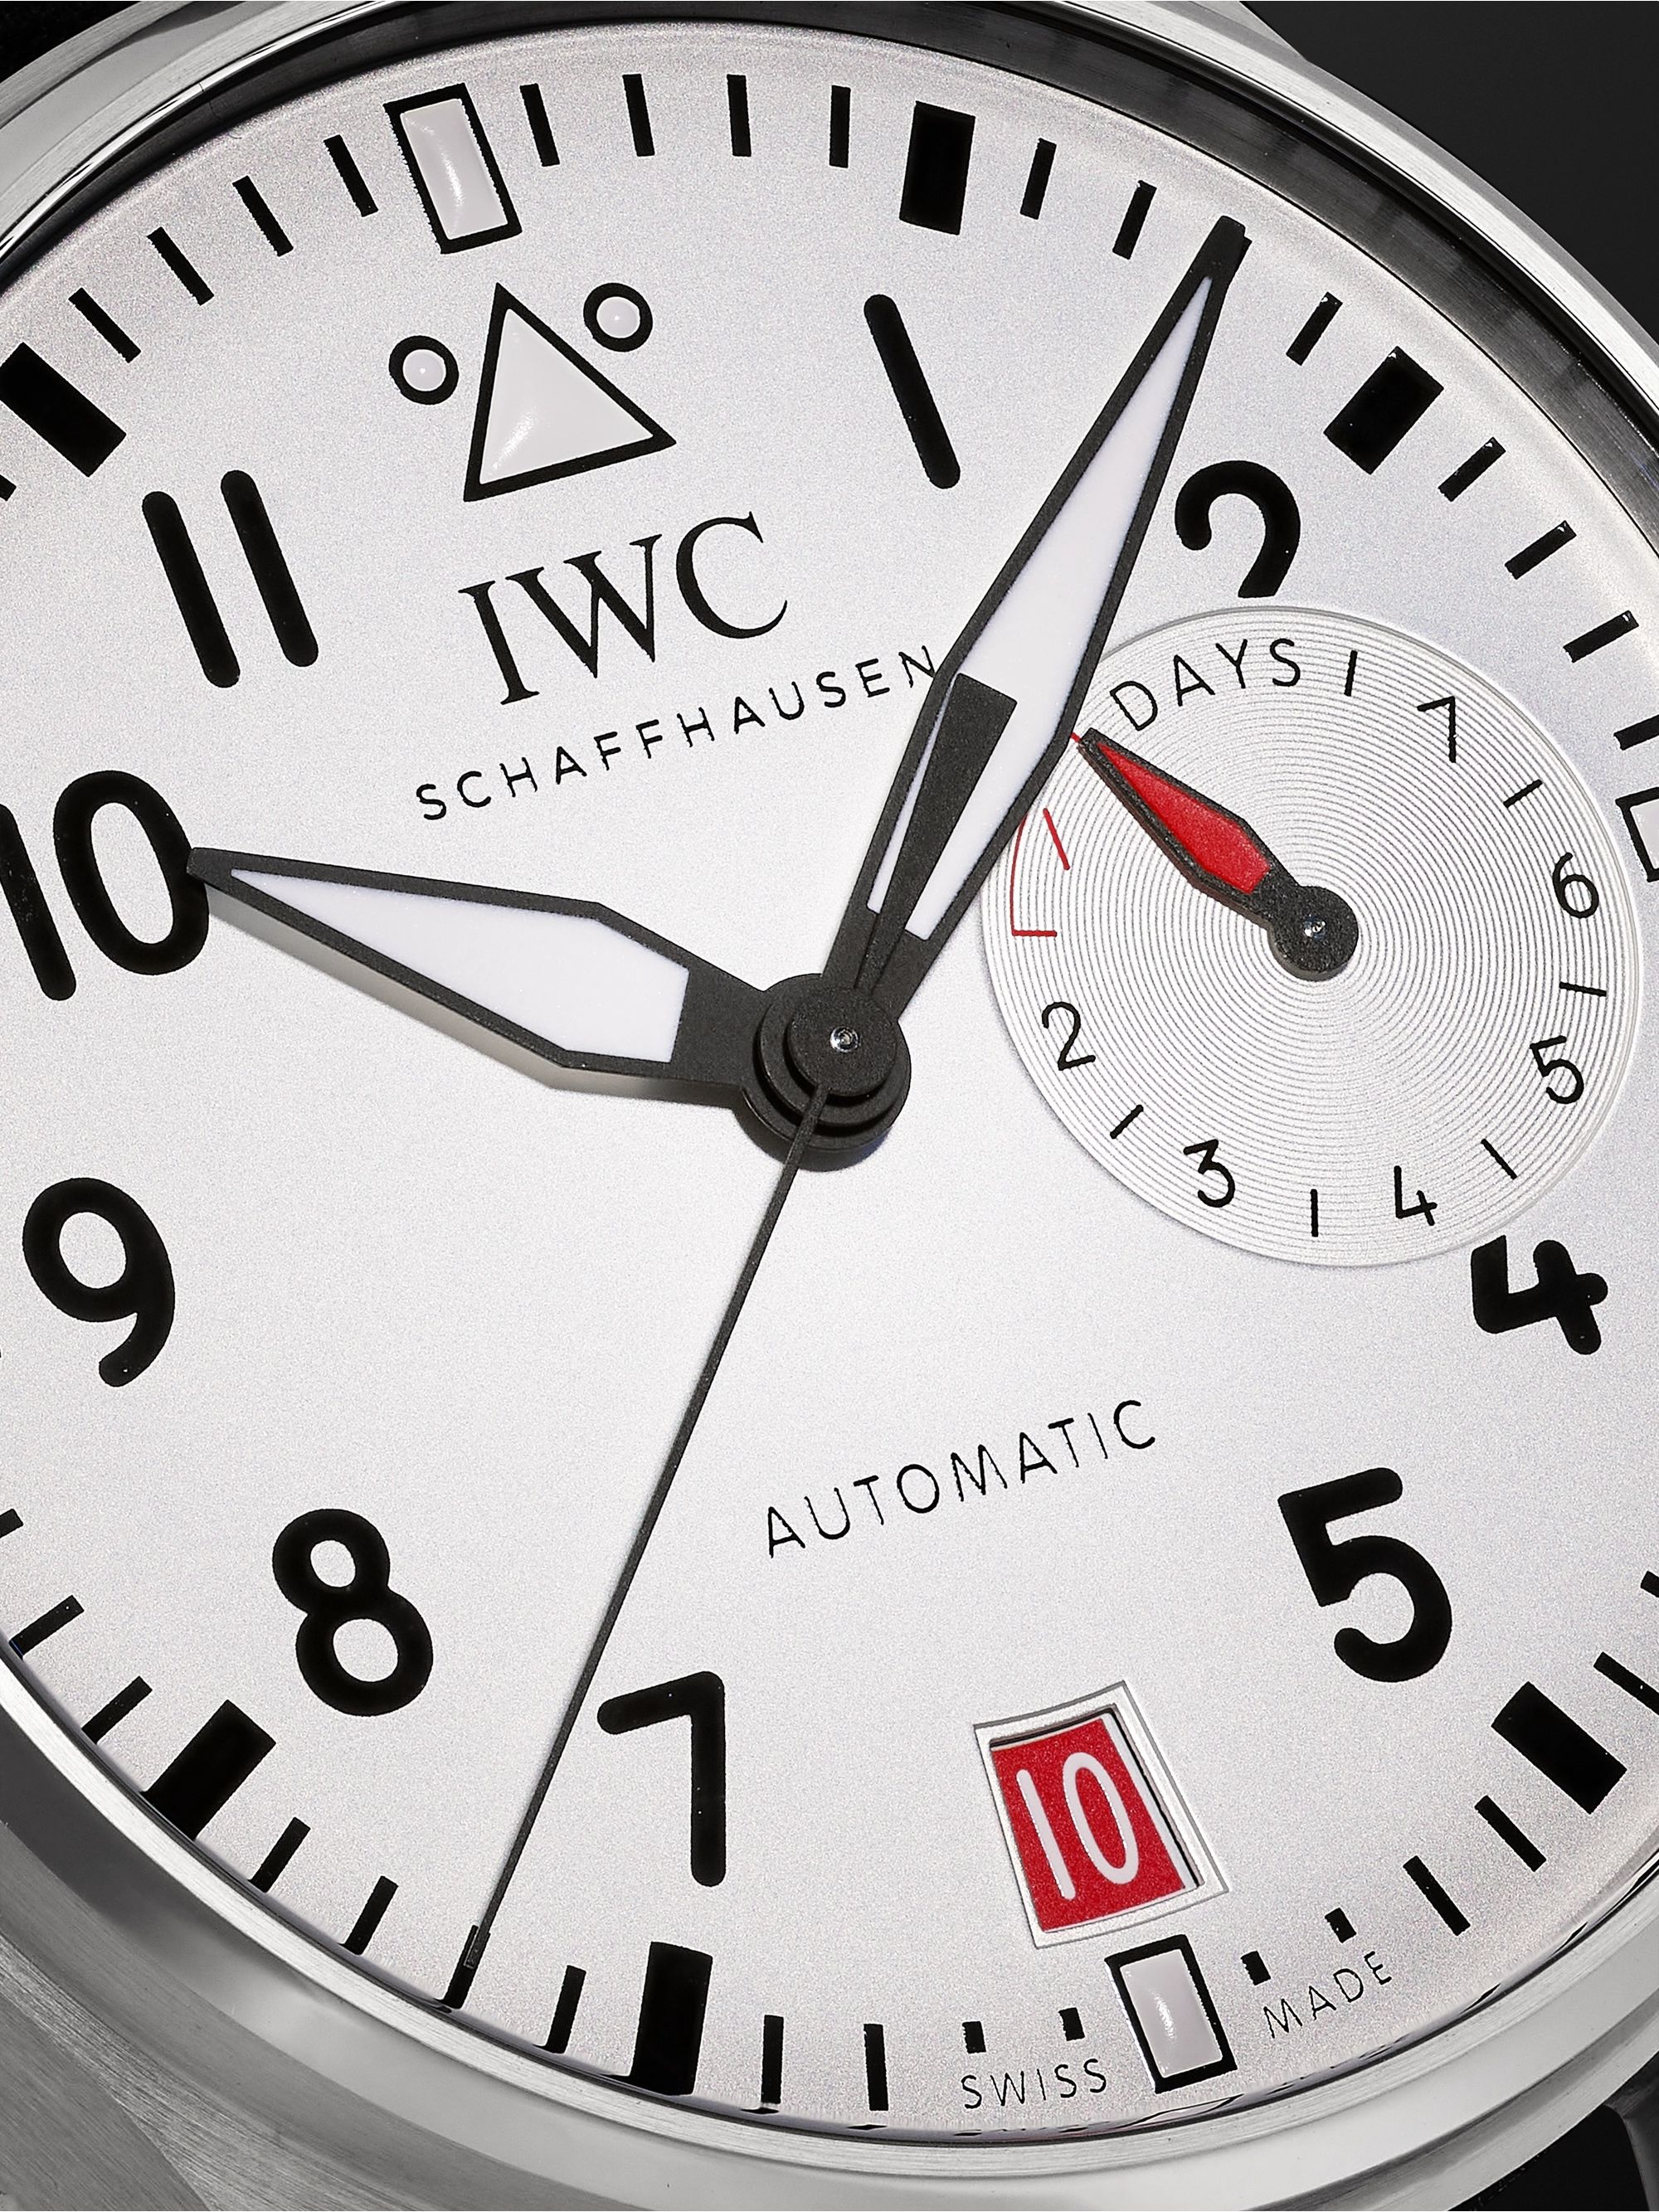 IWC SCHAFFHAUSEN Big Pilot's Las Vegas Limited Edition Automatic 46.2mm Stainless Steel and Leather Watch, Ref. No. IW501014